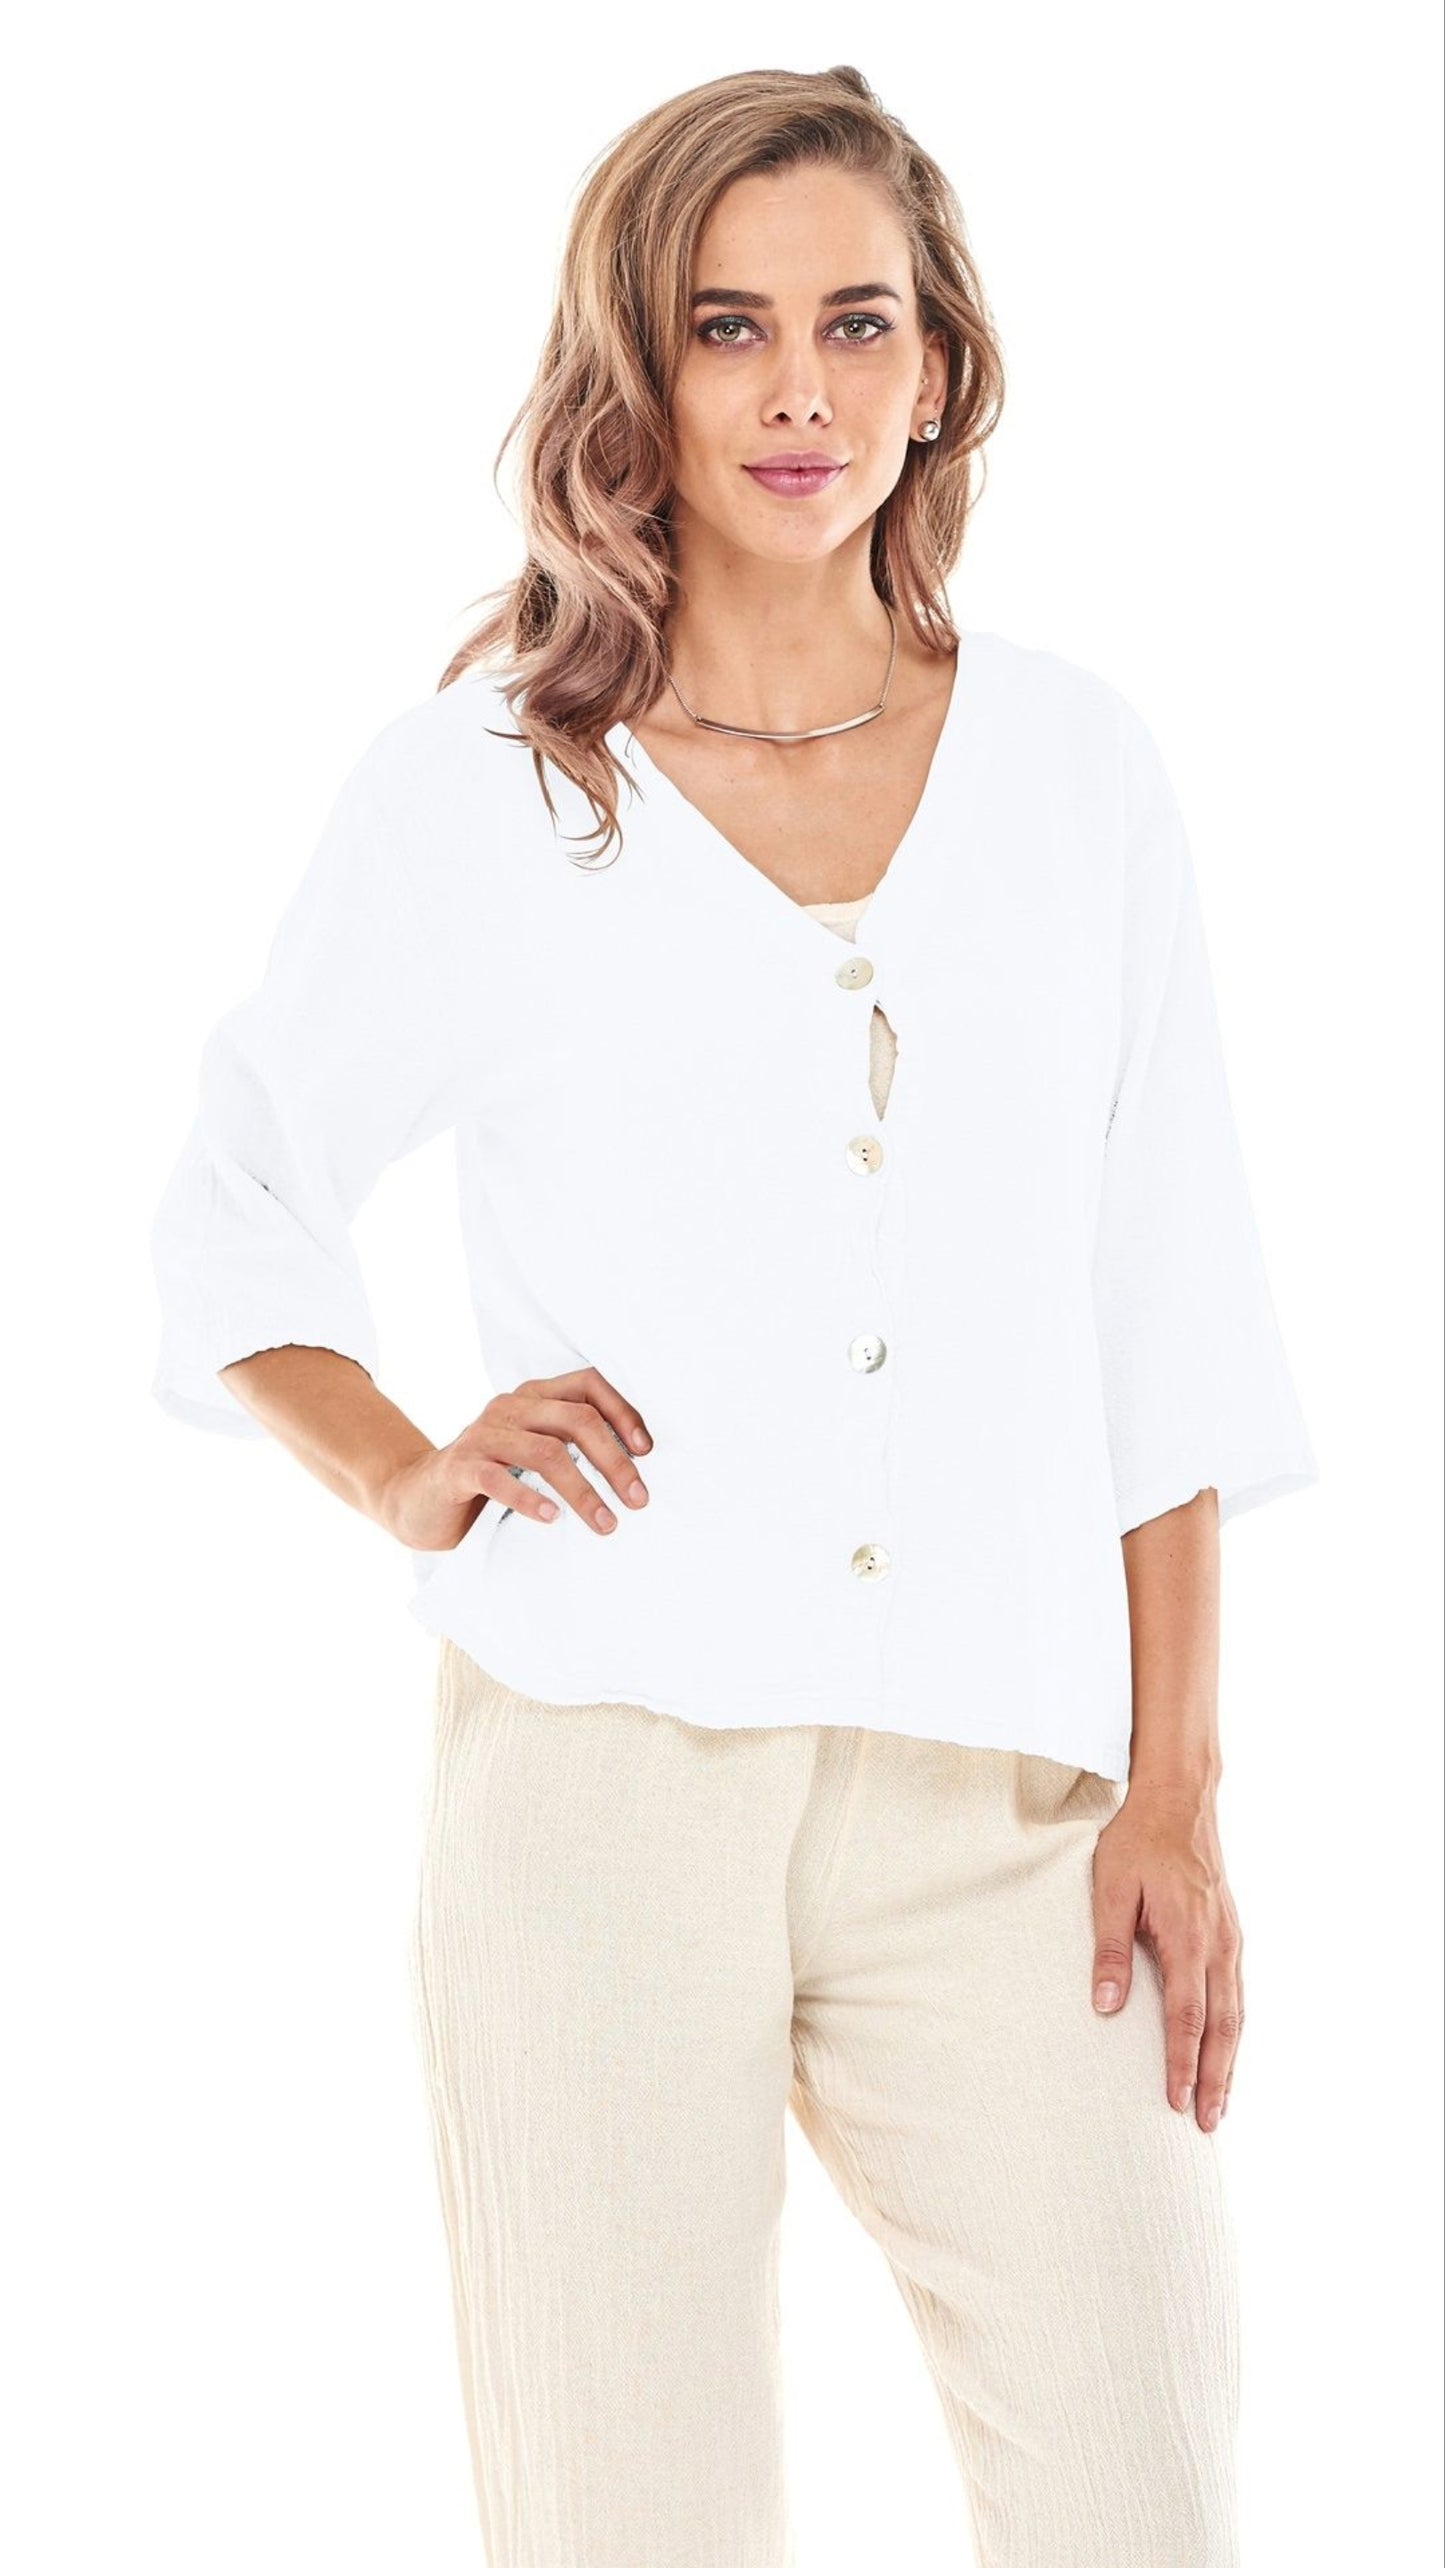 Oh My Gauze Ronie Top - Multiple Colors